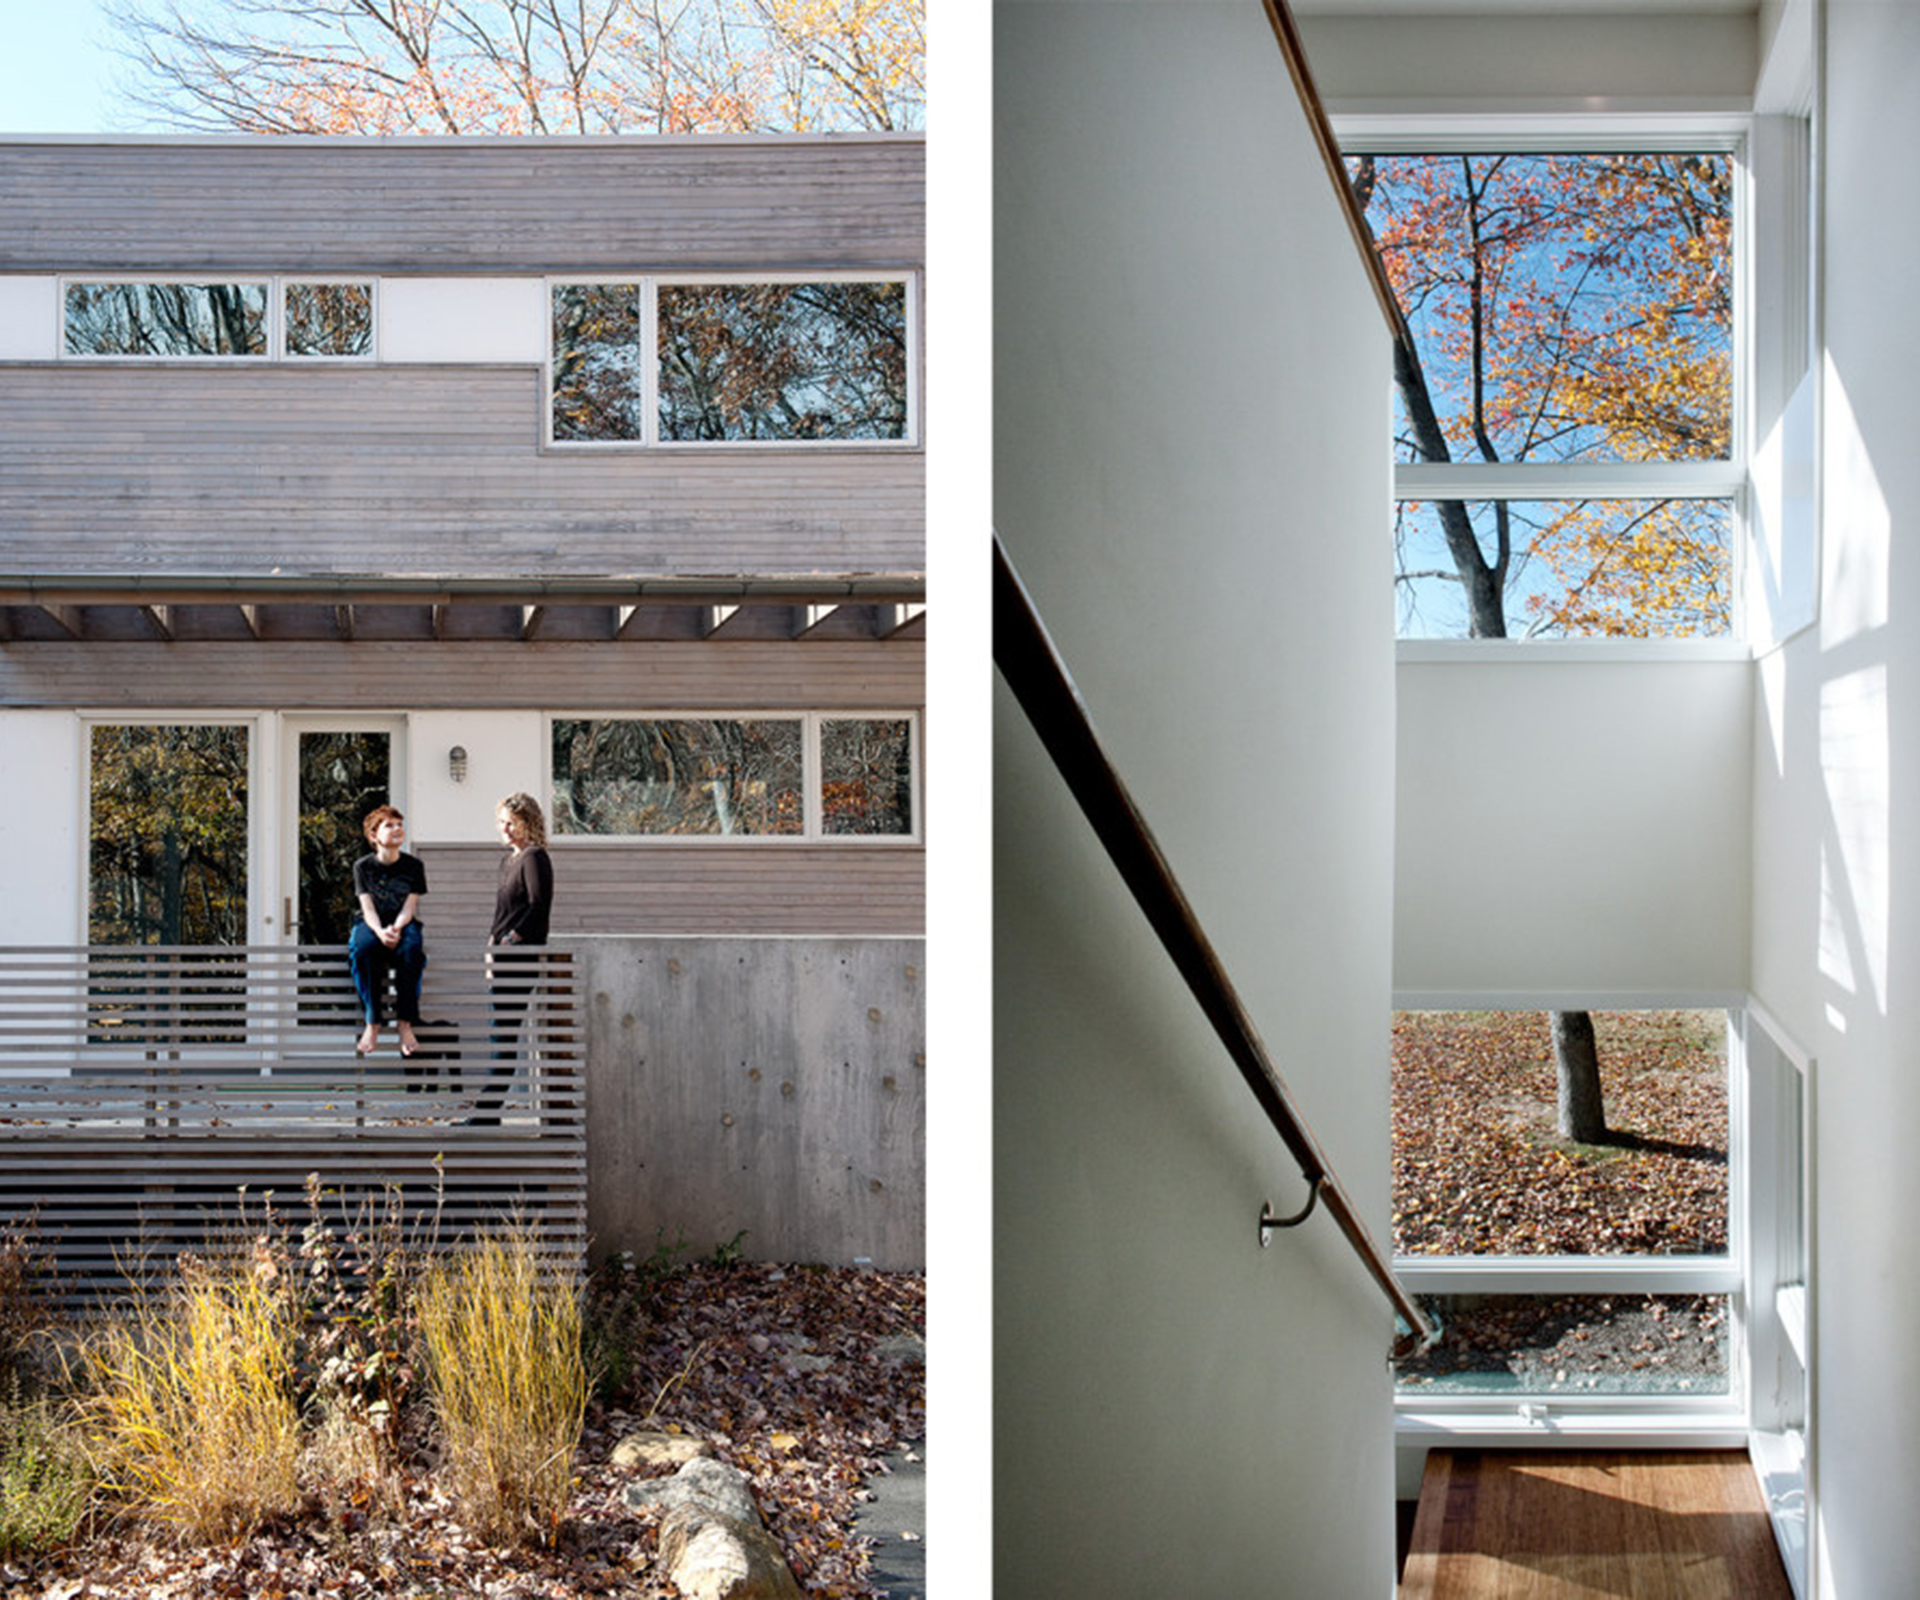 Debbi Gibbs and her son Blake on the deck of their weekend home (left), a prefab design by Resolution: 4 Architecture. Crisp, white interiors (right) in the stairwell direct the eye to the outdoors.